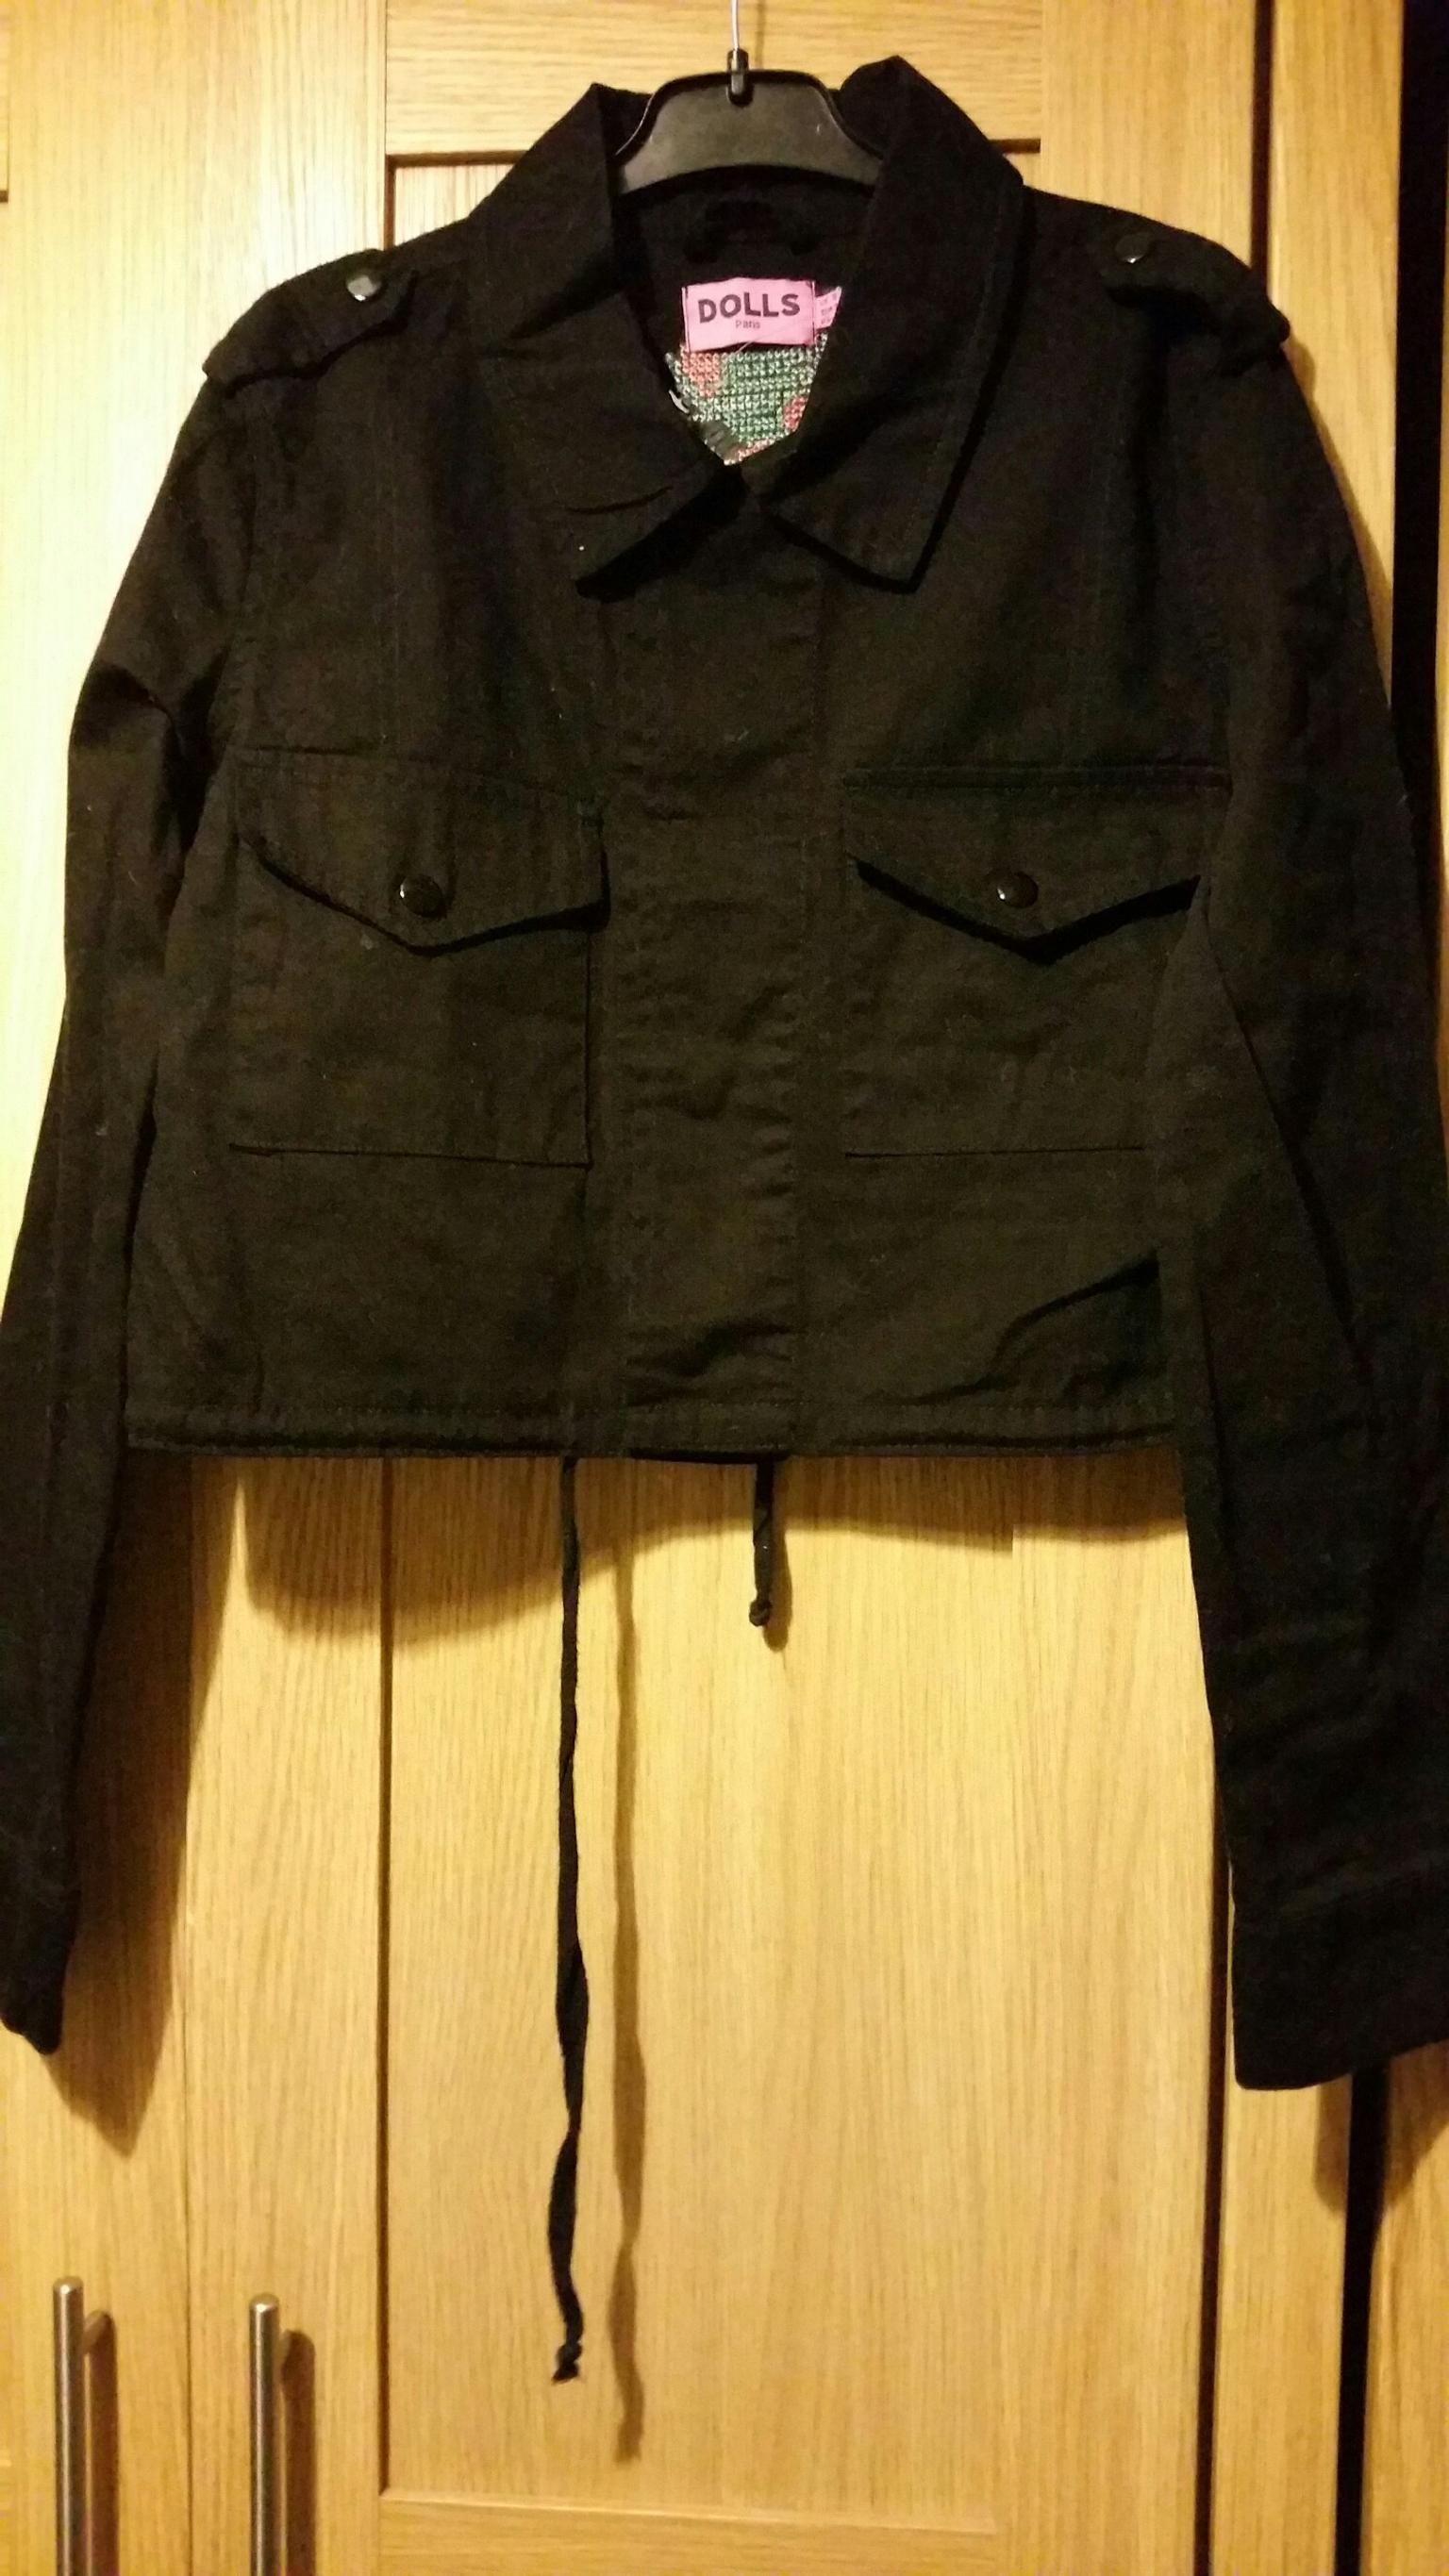 2 Girls jackets in M8 Manchester for £5.00 for sale | Shpock